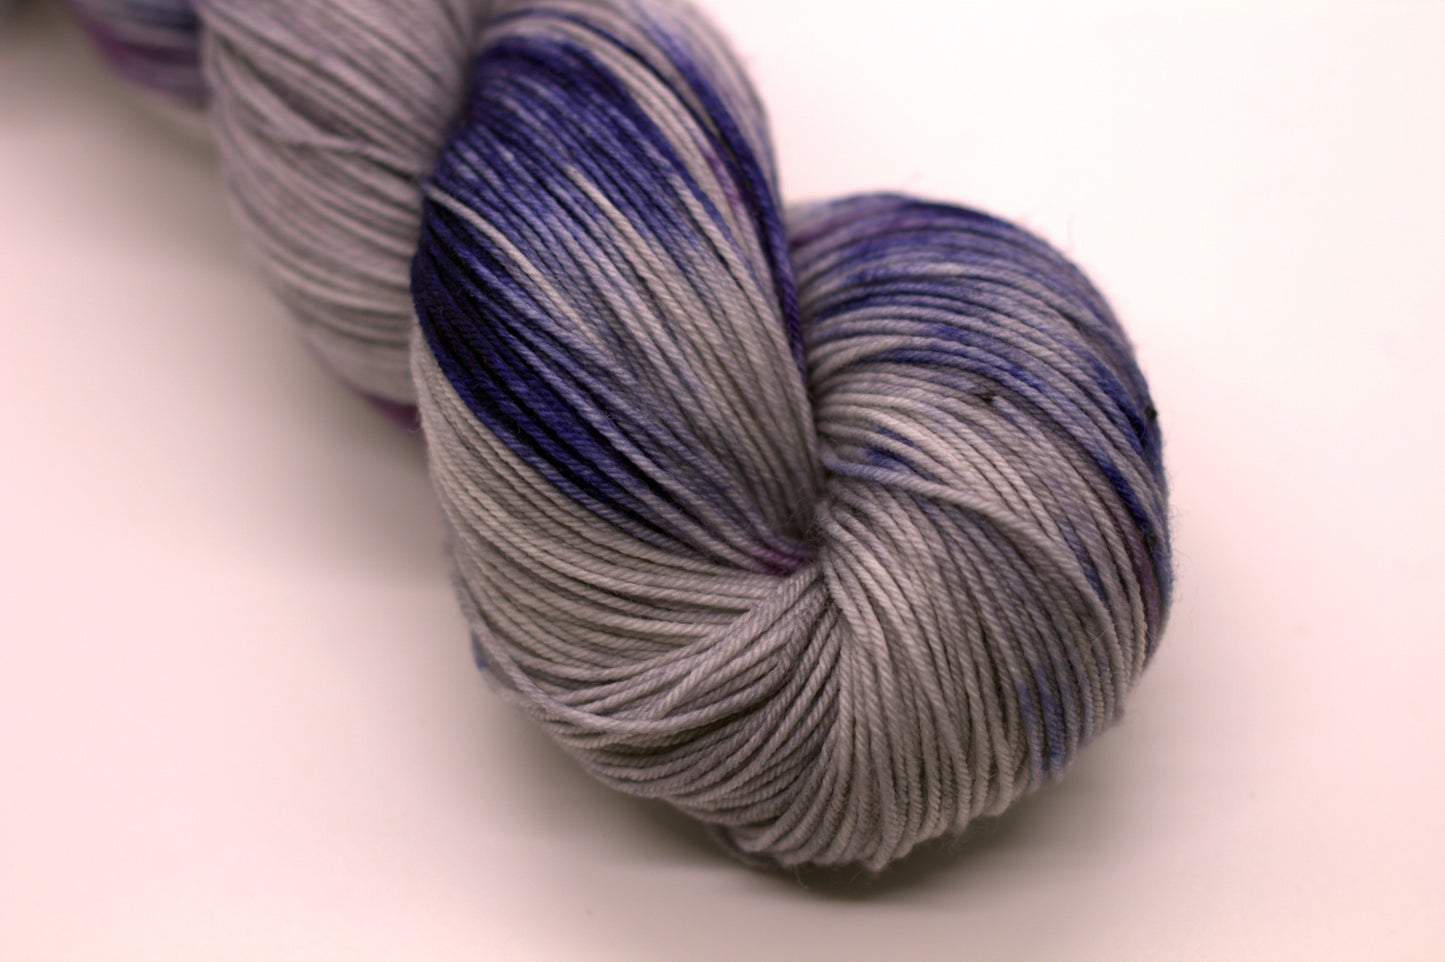 Close up of one twisted skein of gray, blue and purple variegated yarn on white background.